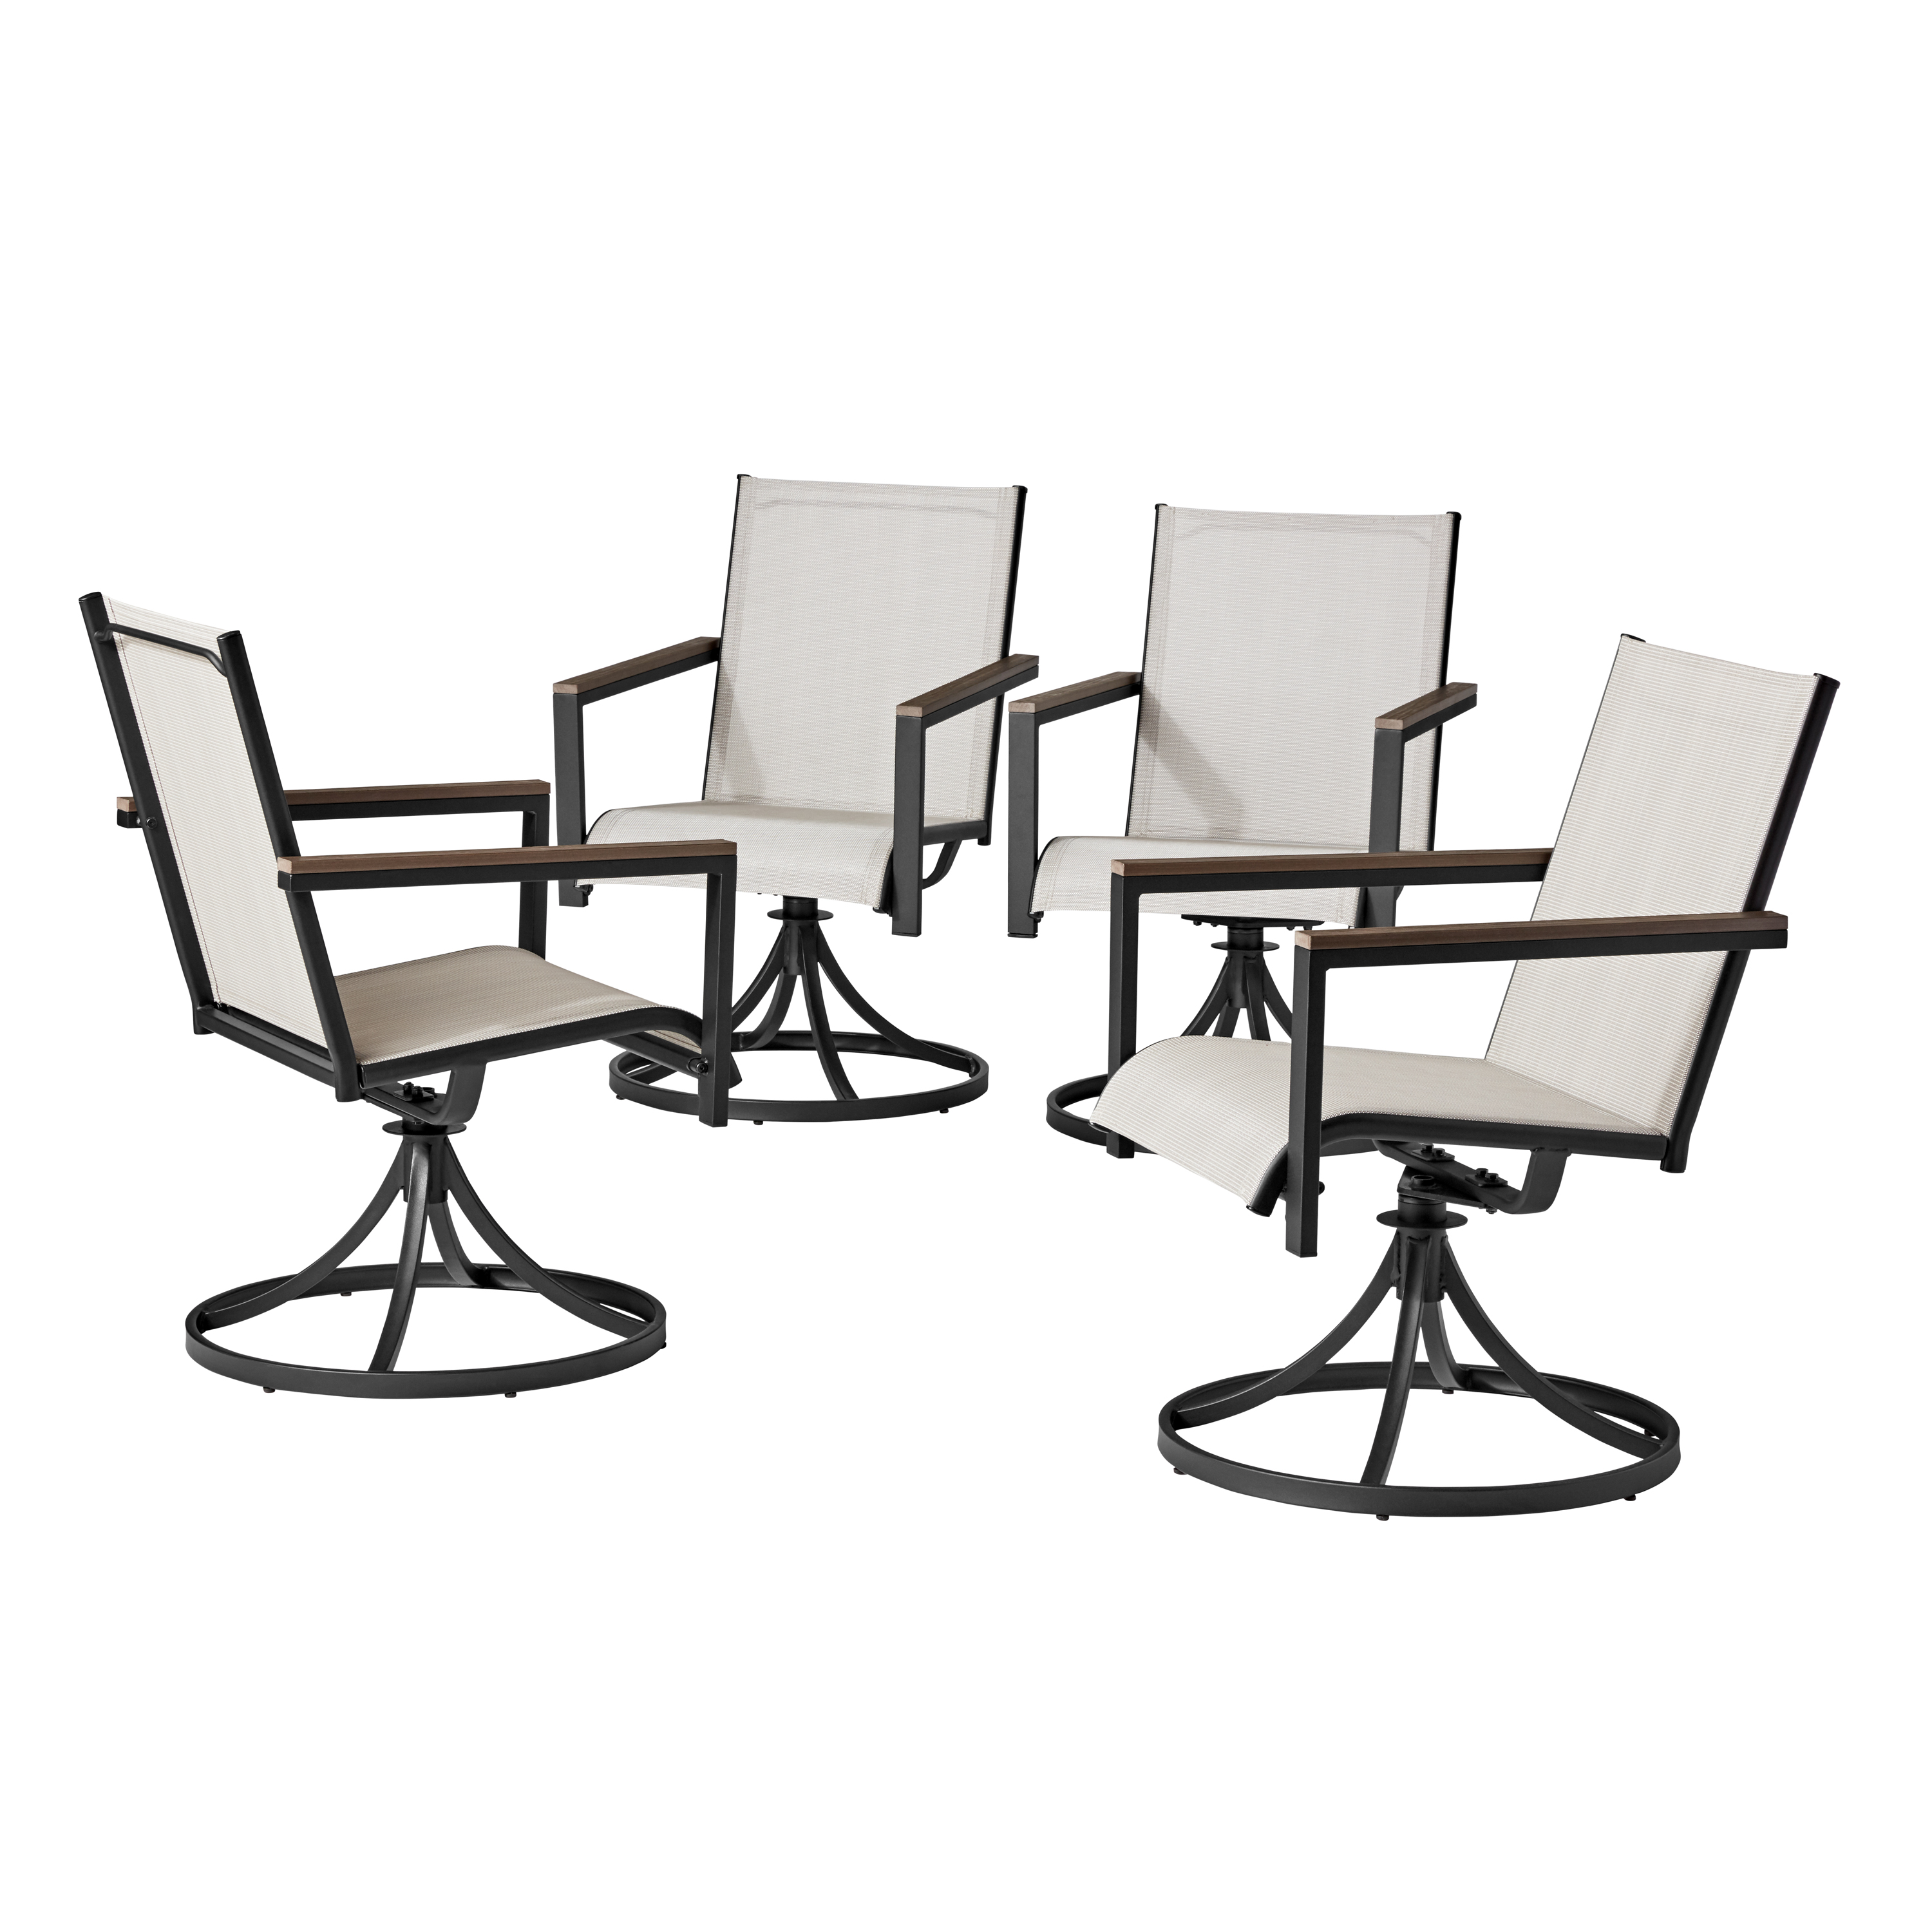 Grand Leisure Hans Outdoor Dining Chair - Steel - Set of 4 - Gray - image 1 of 6